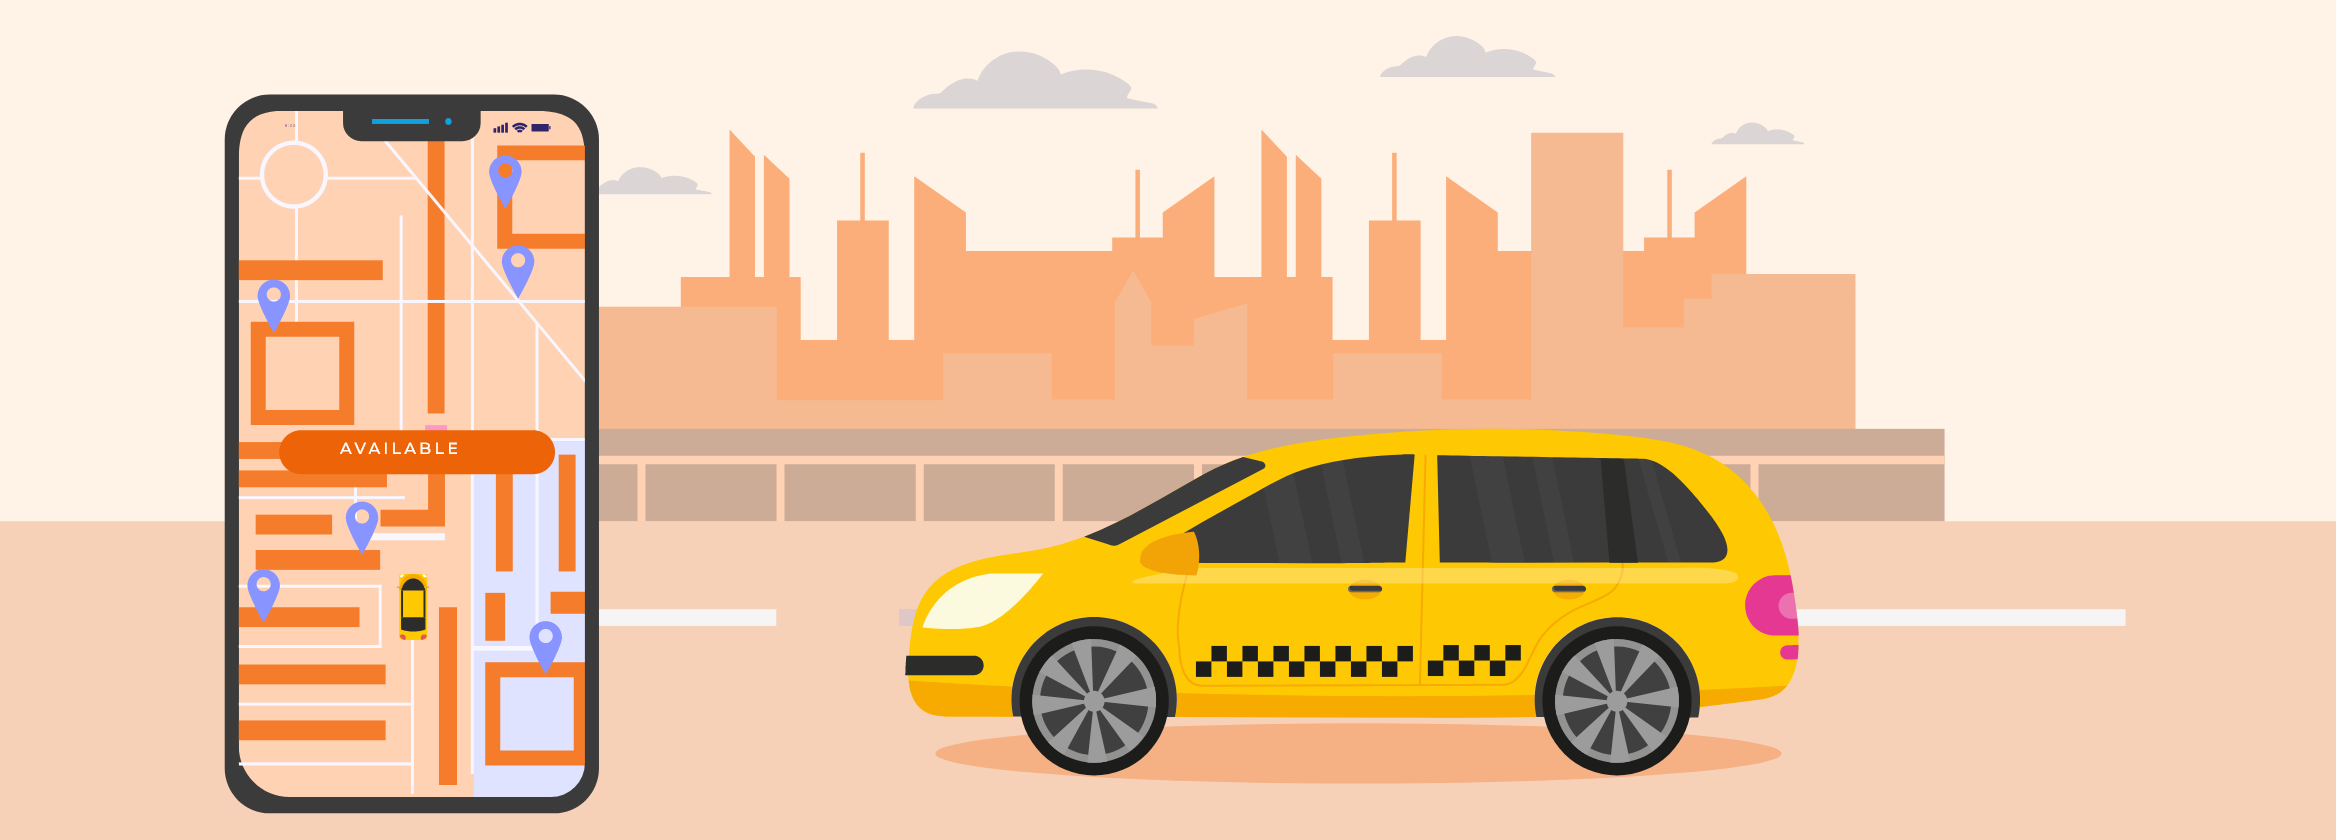 Achieve 5X Business Growth with Robust Taxi Dispatch Software: Your 5-Minutes GuideBook!